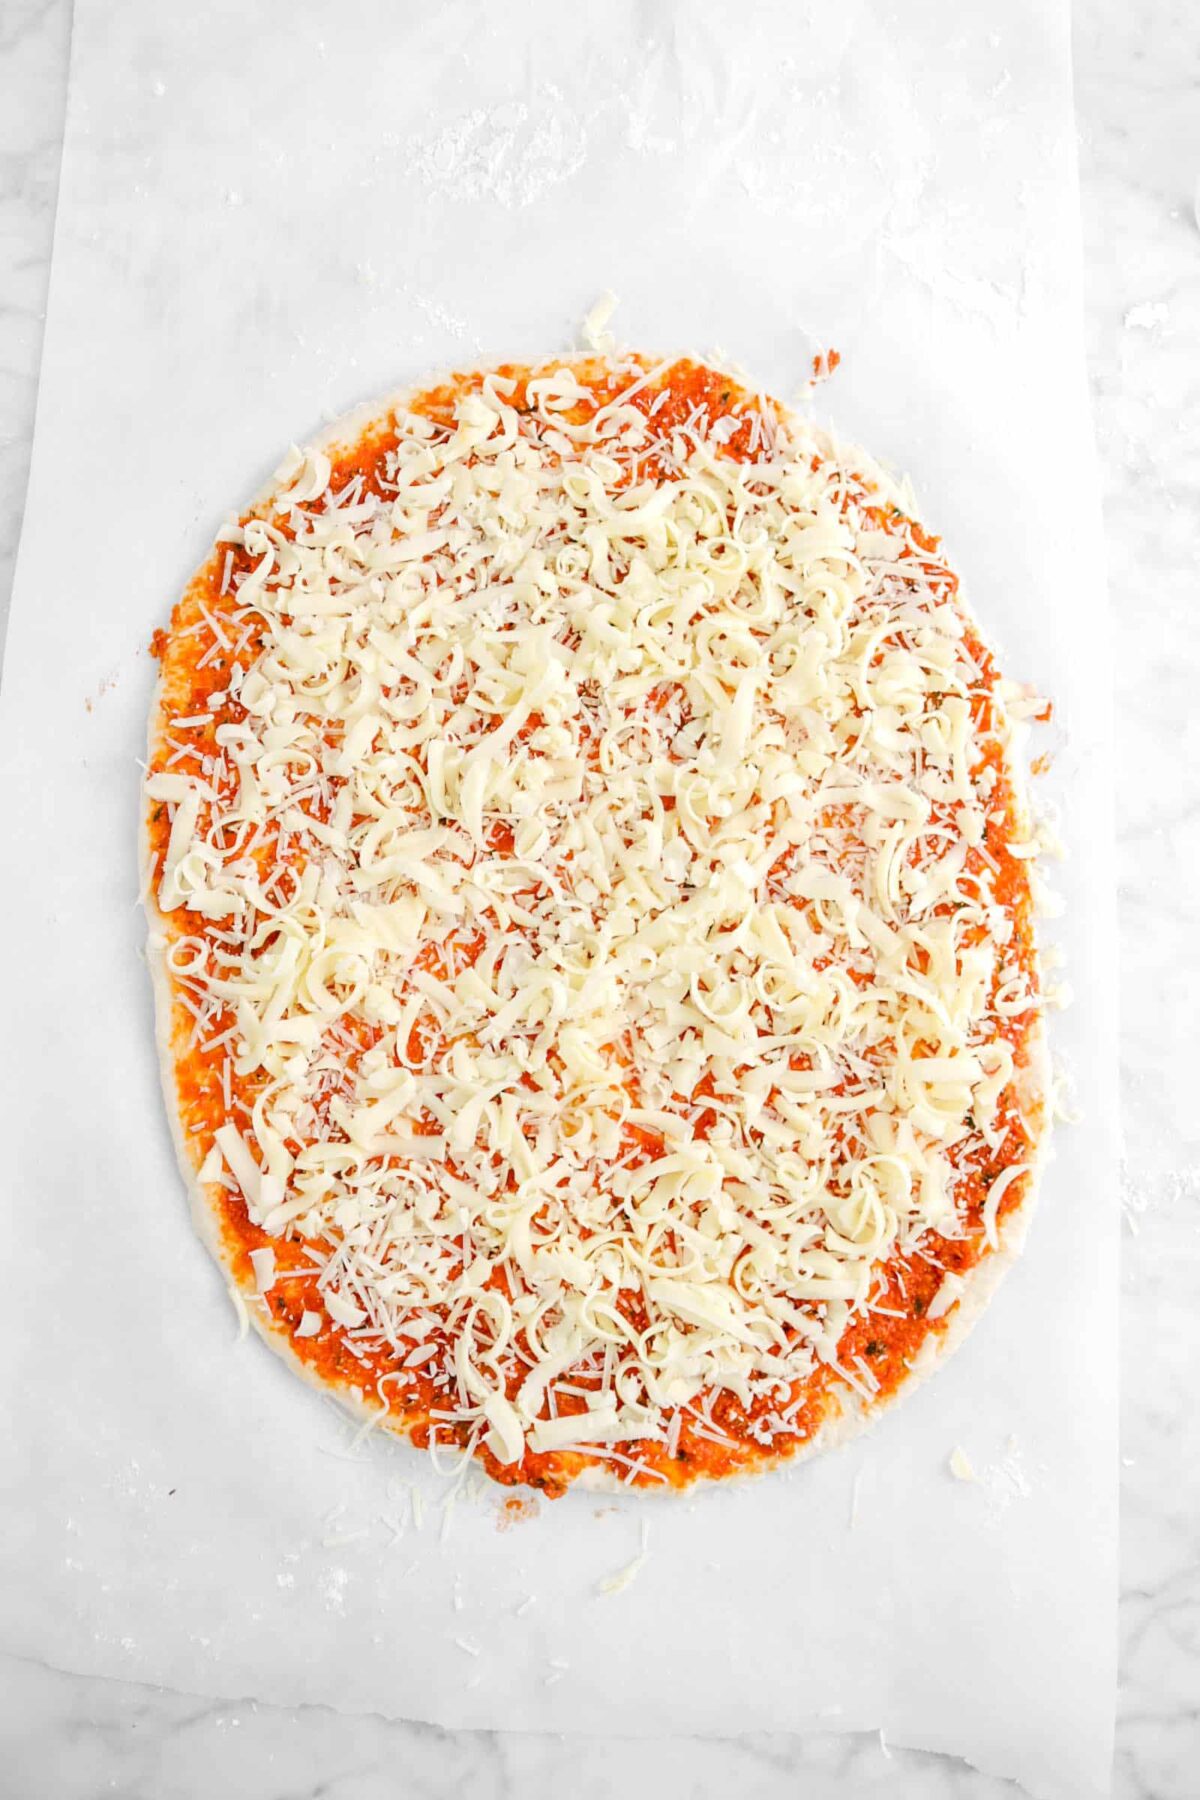 grated mozzarella added on top of parmesan